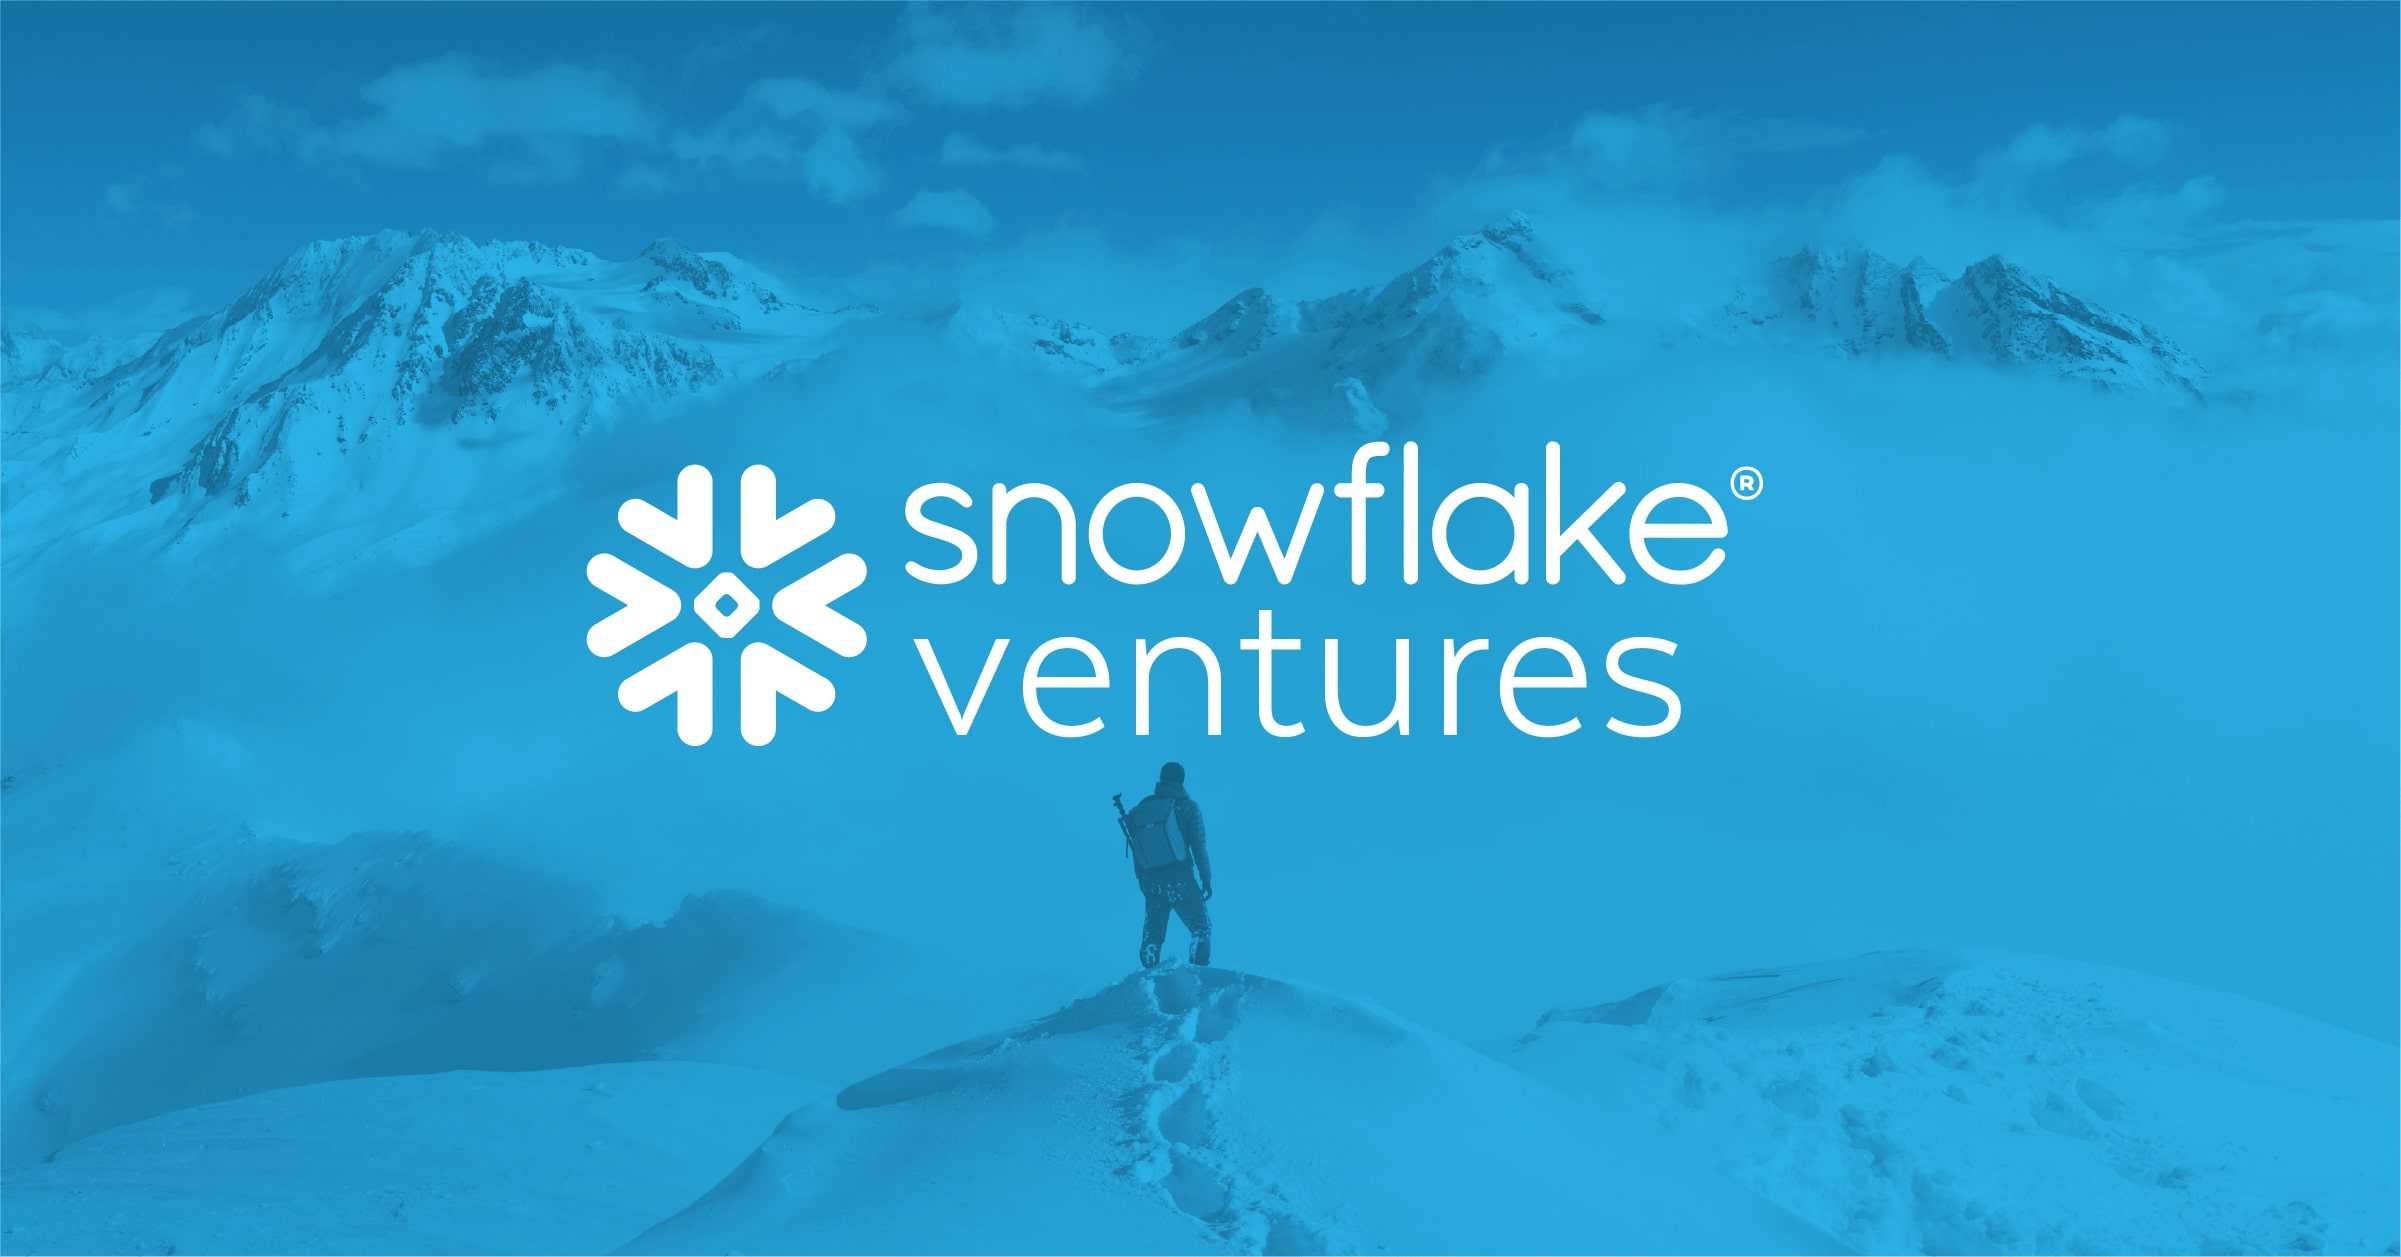 Snowflake Ventures Invests in Robling to Add More Retail Capabilities to the Data Cloud